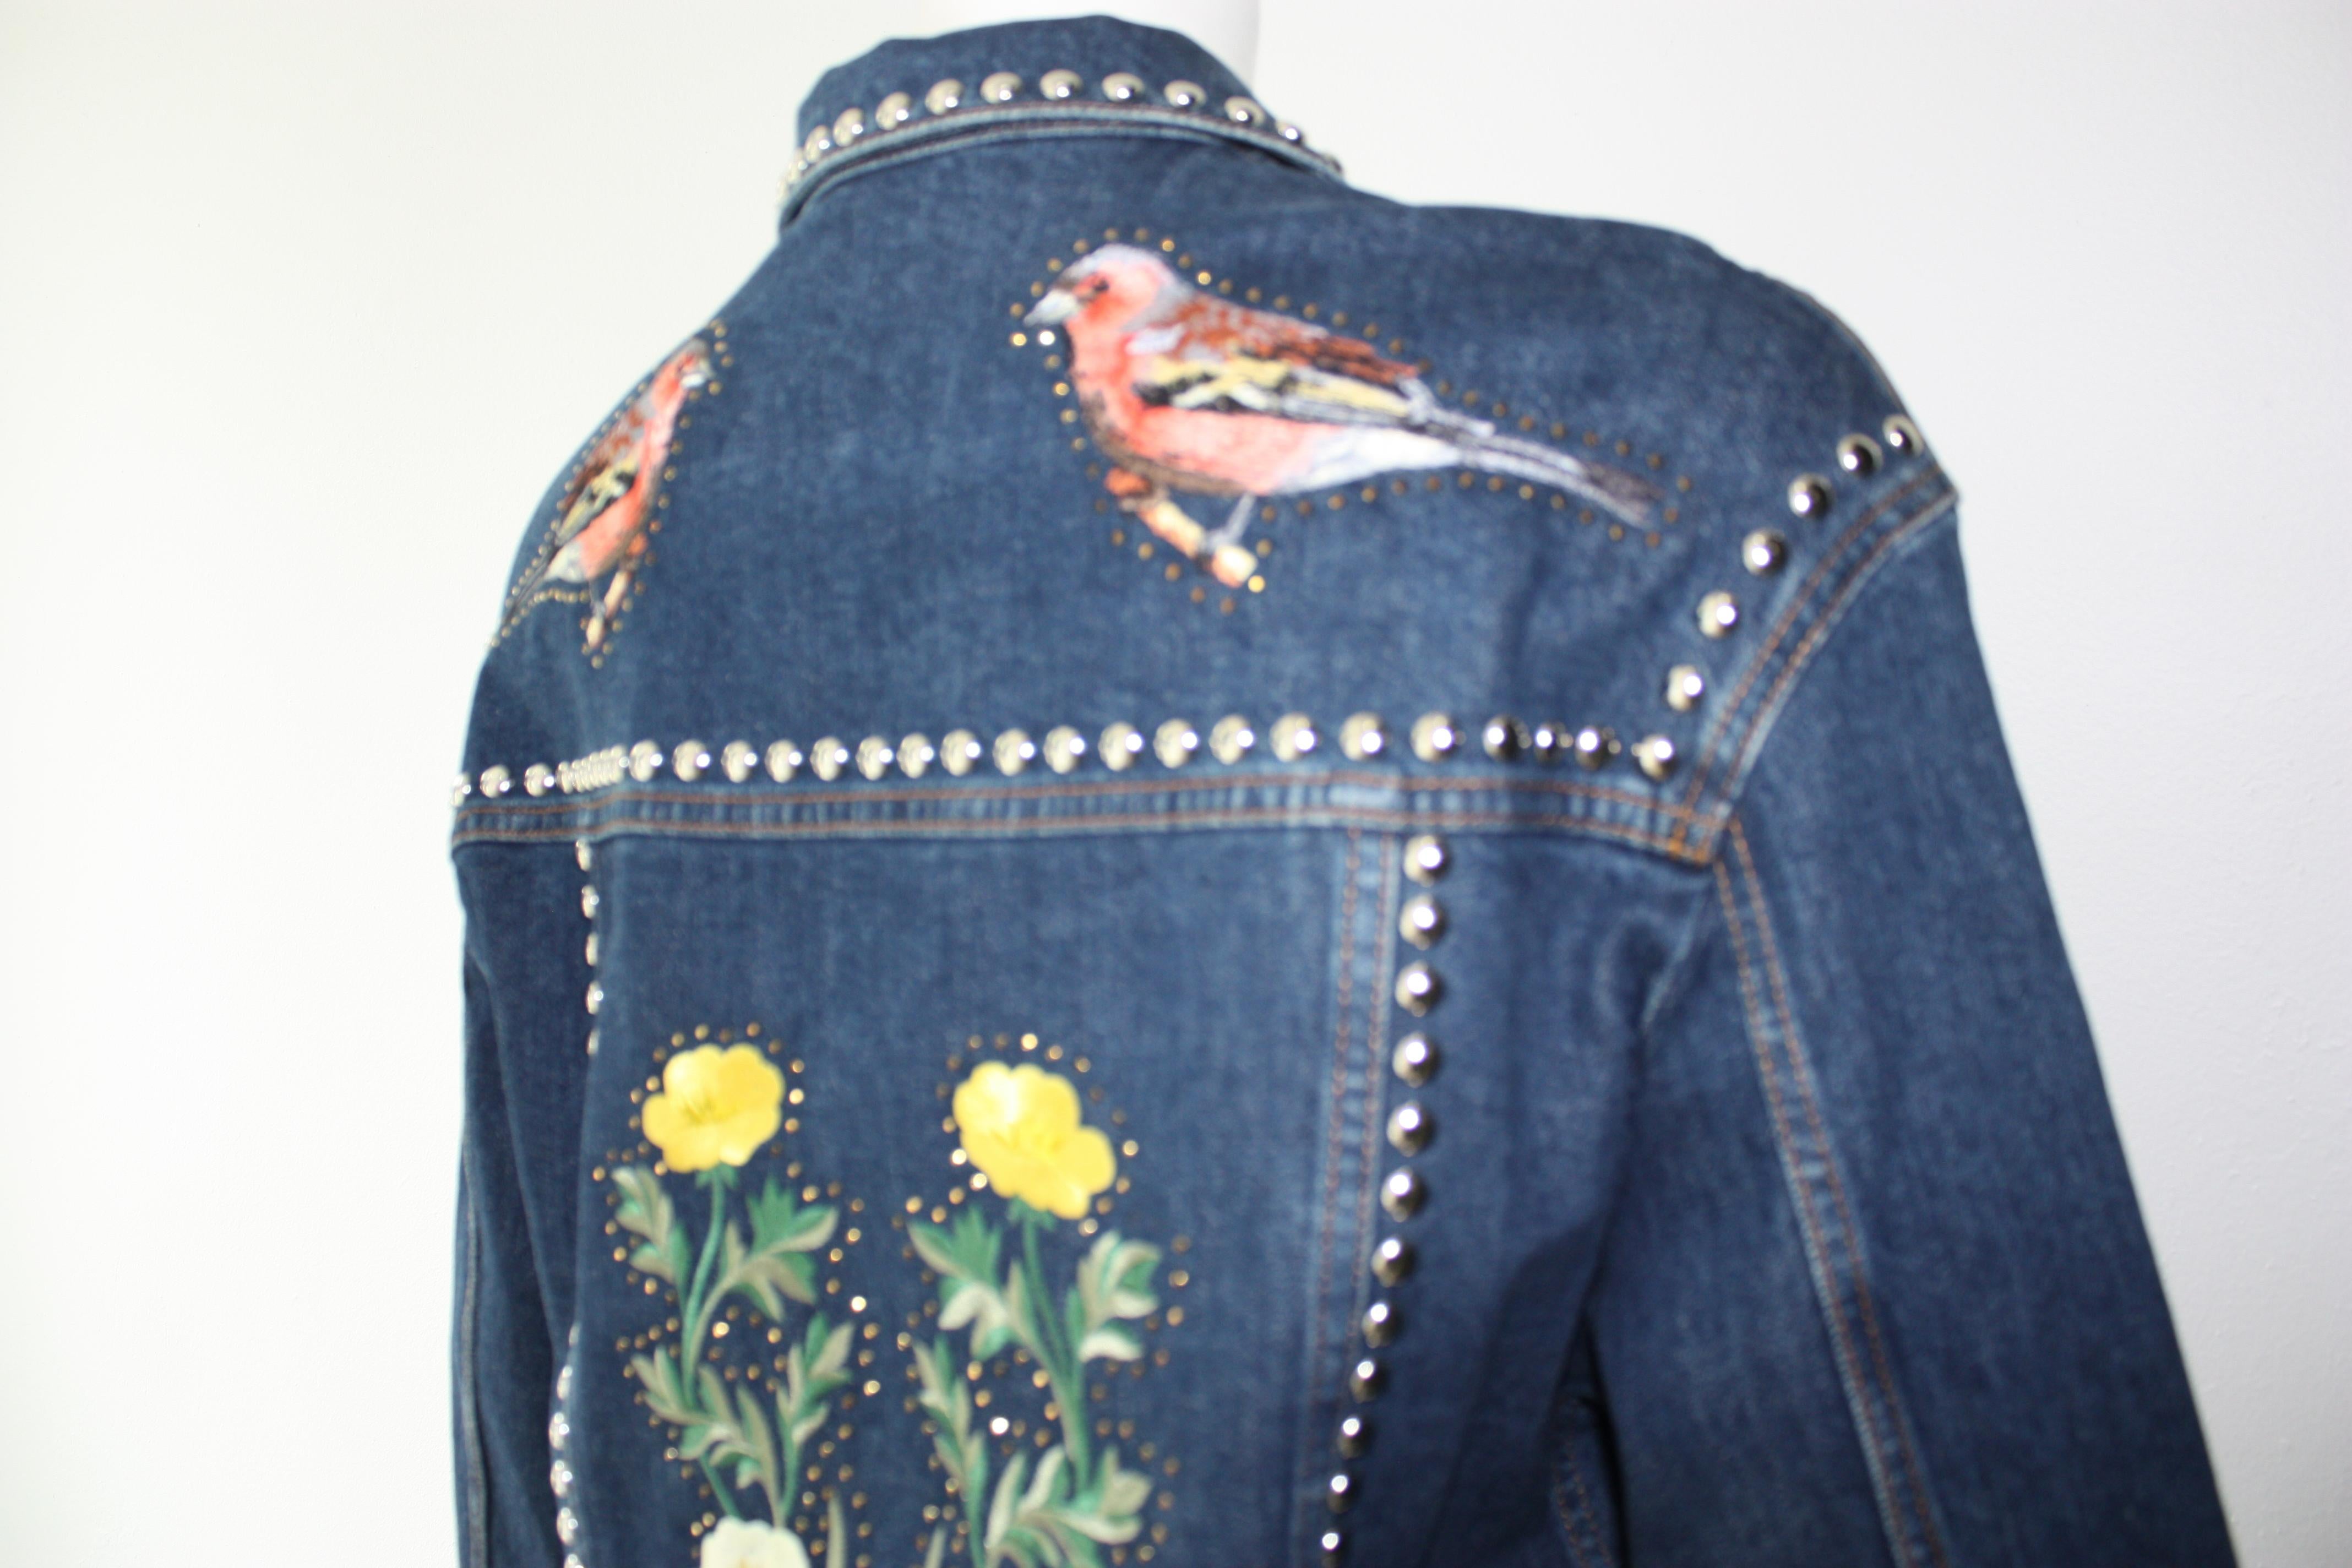 Stella McCartney Denim Multi-Colored and Floral Embroidered Jacket  3